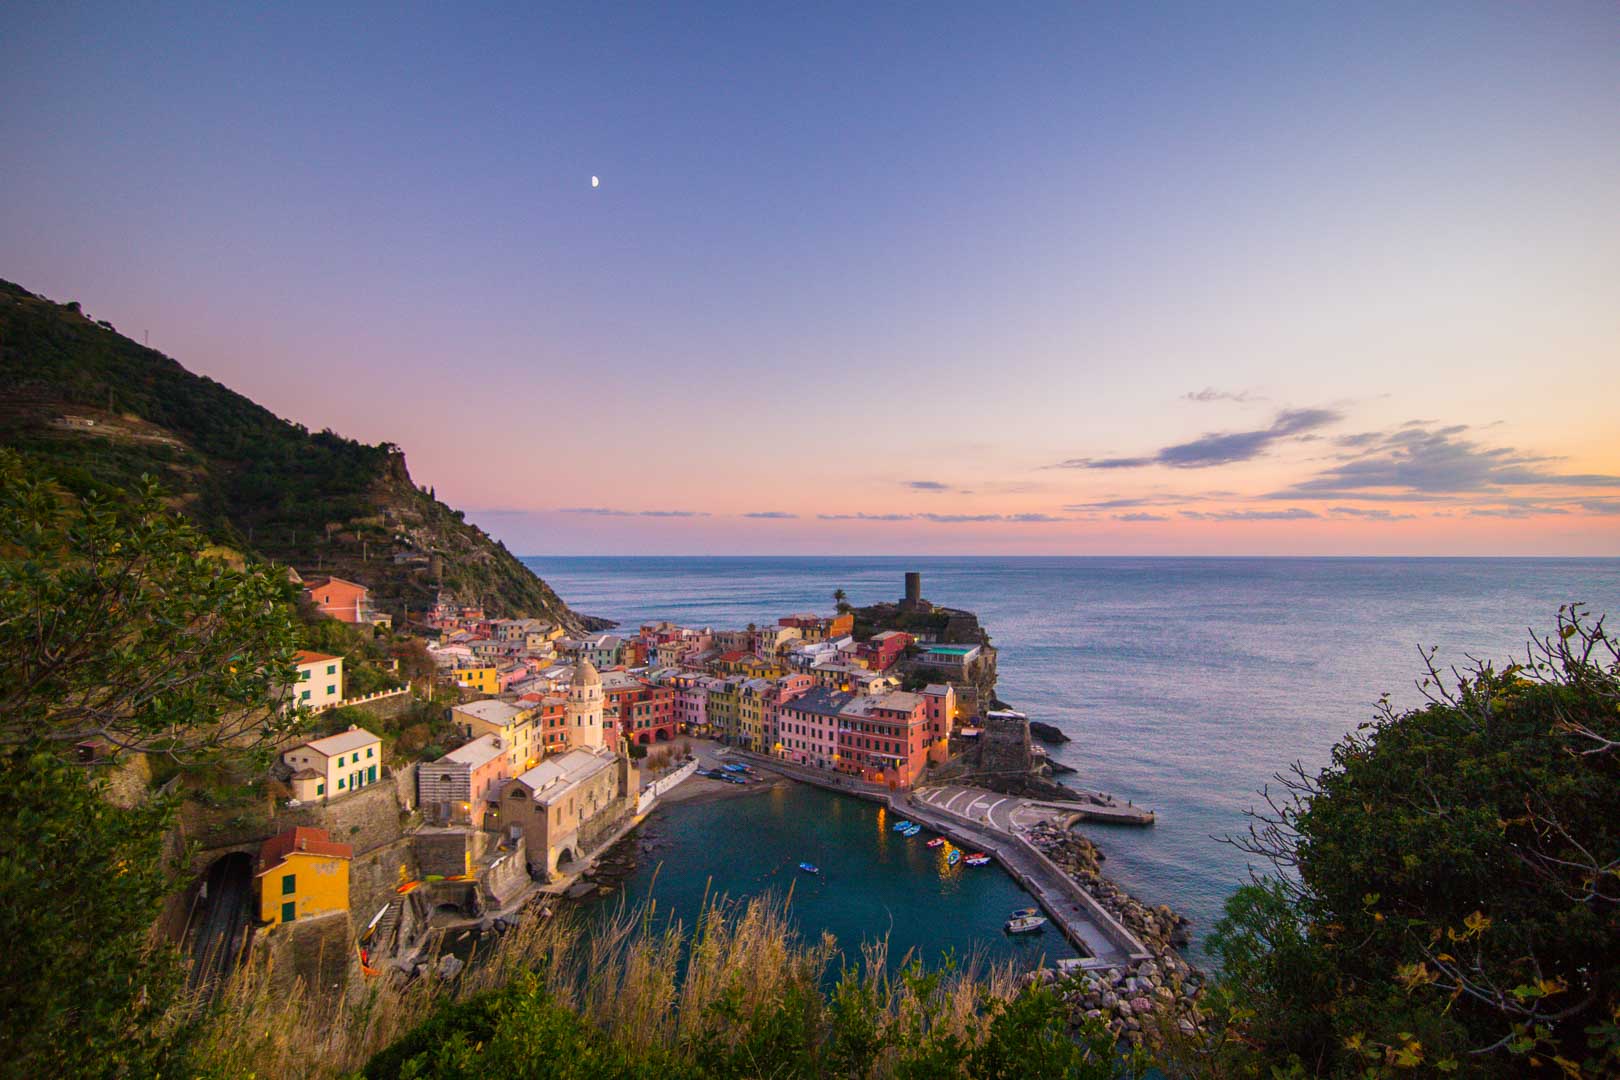 viewpoint over the village of vernazza